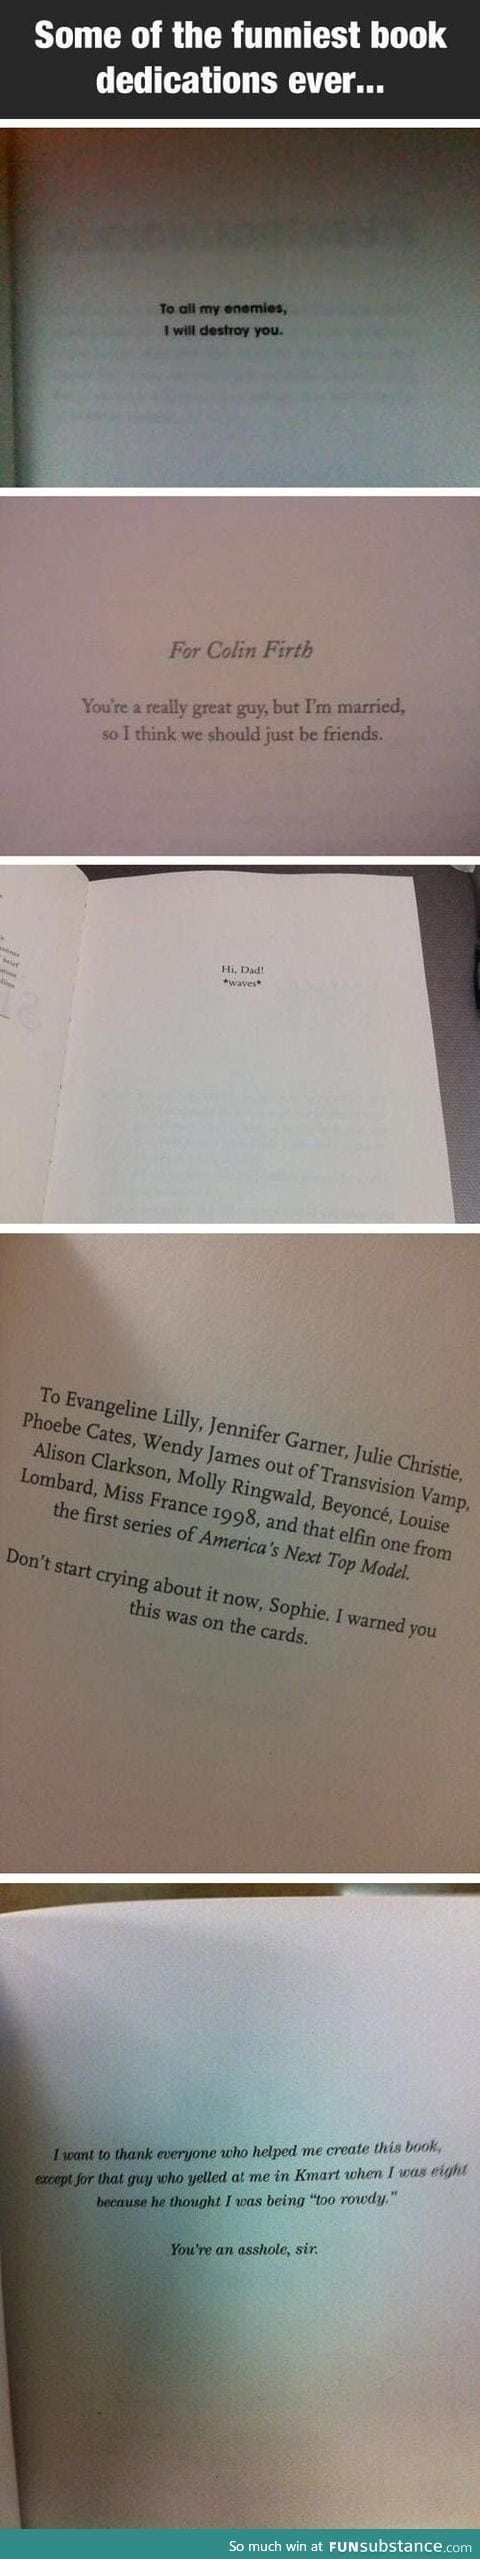 Some of the best book dedications ever